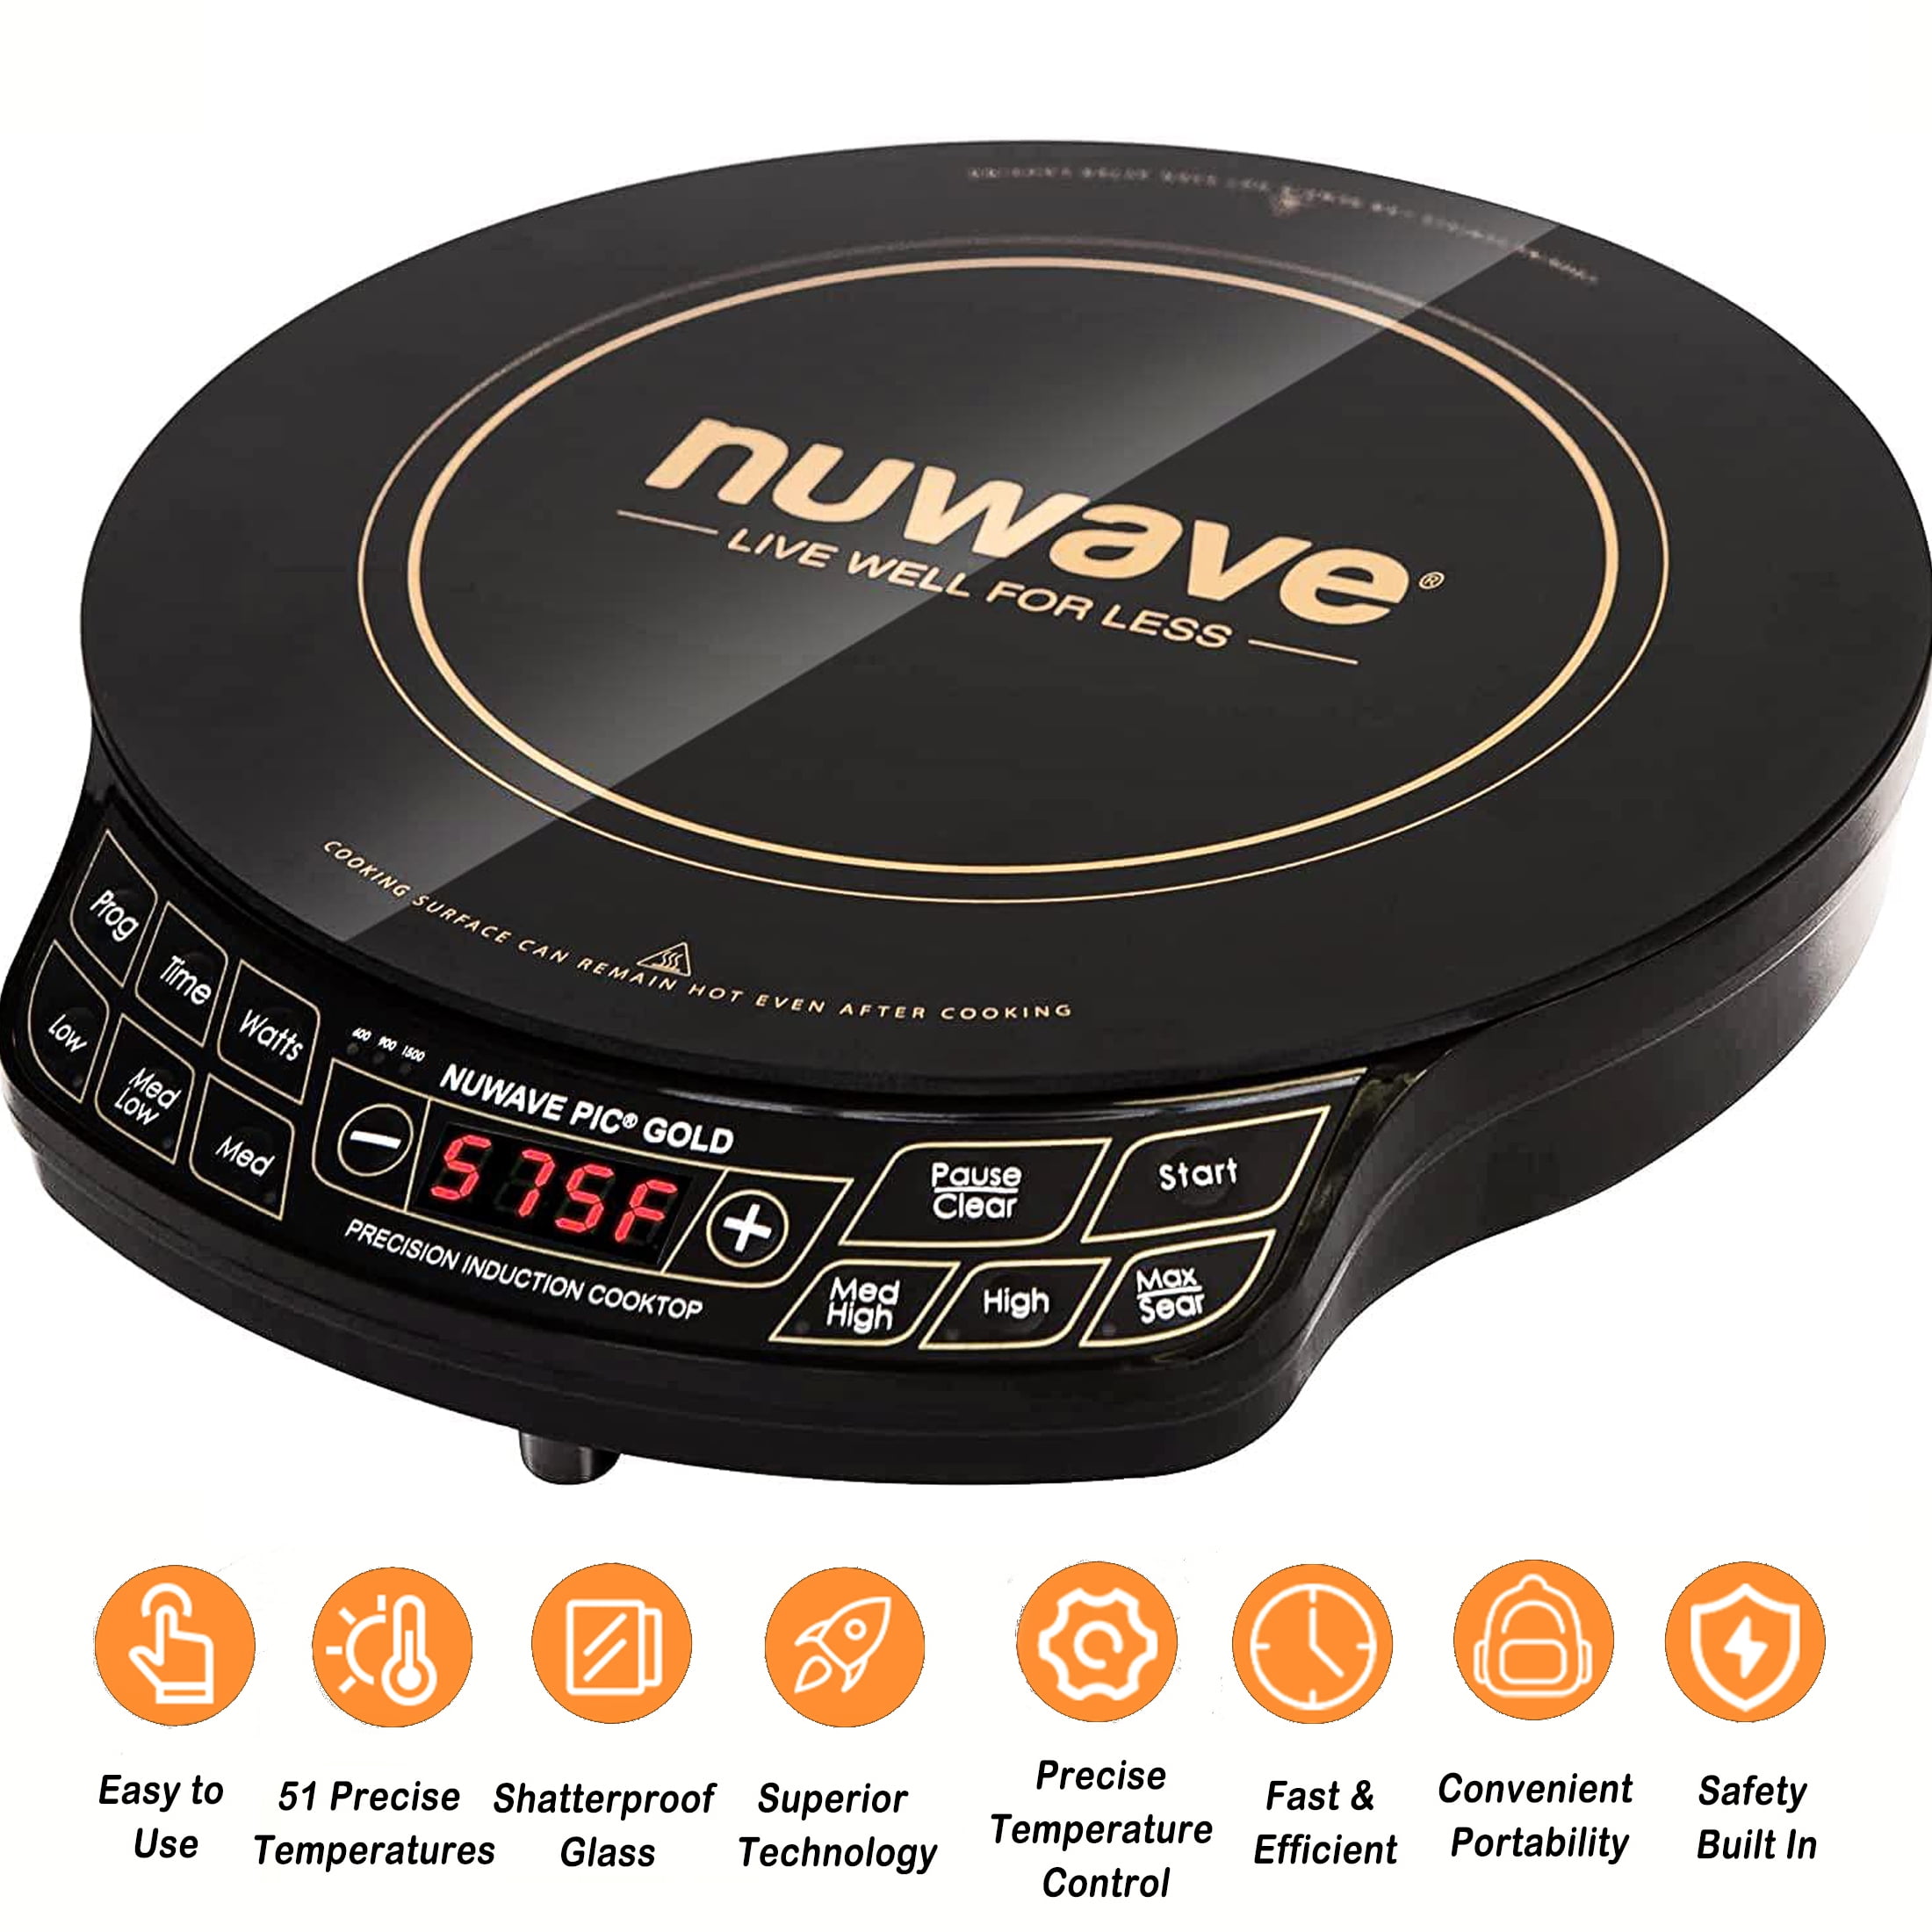 Nuwave Flex Precision Induction Cooktop, Portable, Large 6.5” Heating Coil,  10.25” Shatter-Proof Ceramic Glass, 3 Watt Settings, 4Qt Induction-Ready